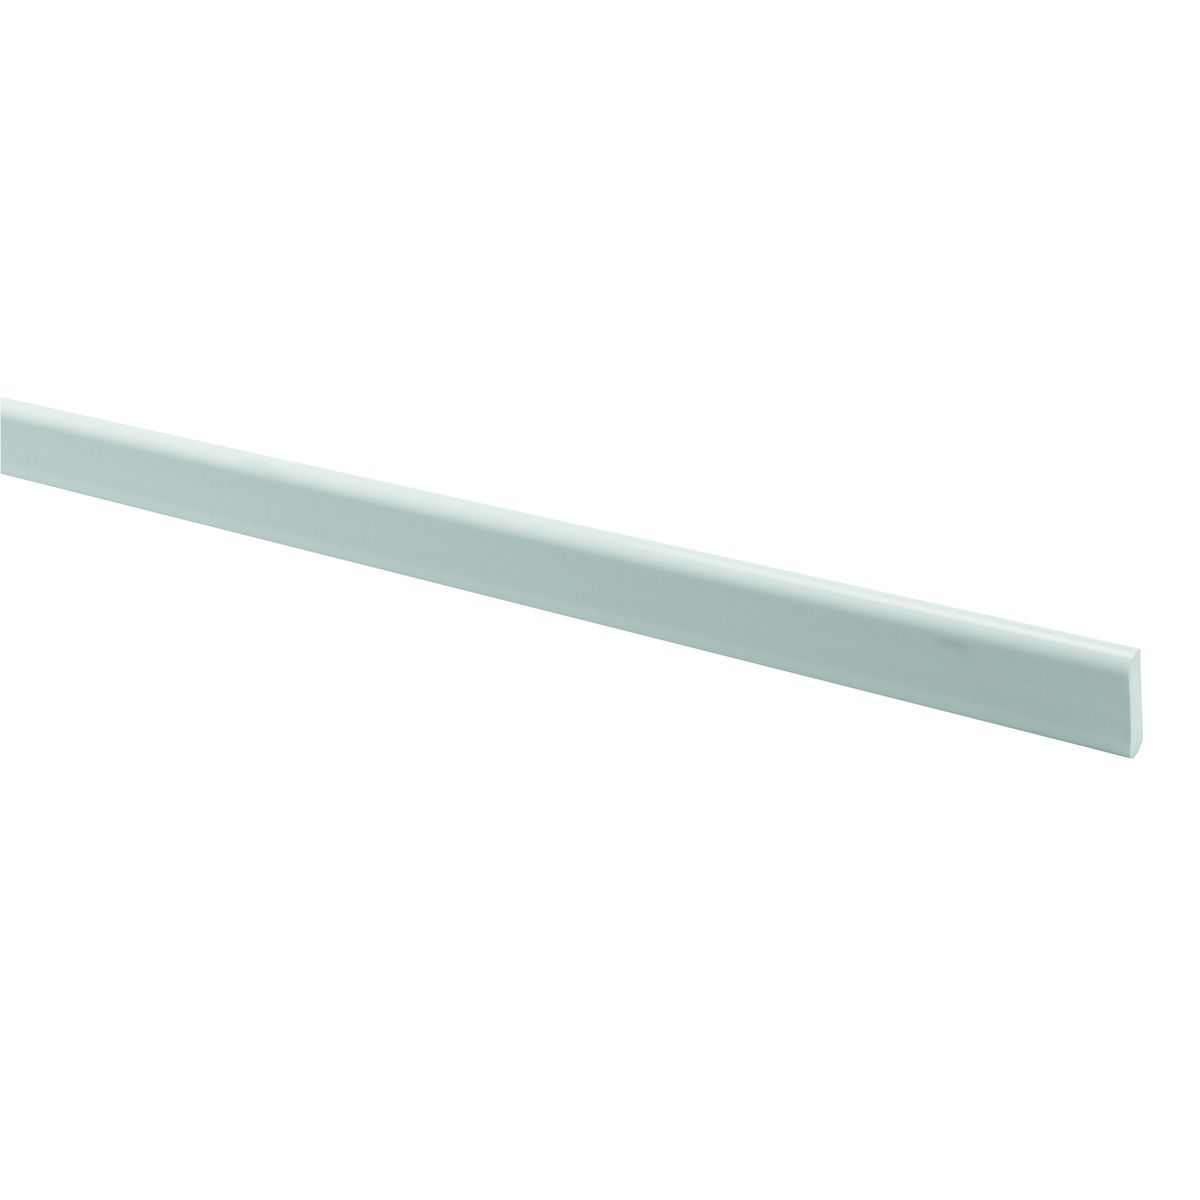 Image of Wickes PVCu White Window Cloaking Trim - 30 x 2500mm - Pack of 5